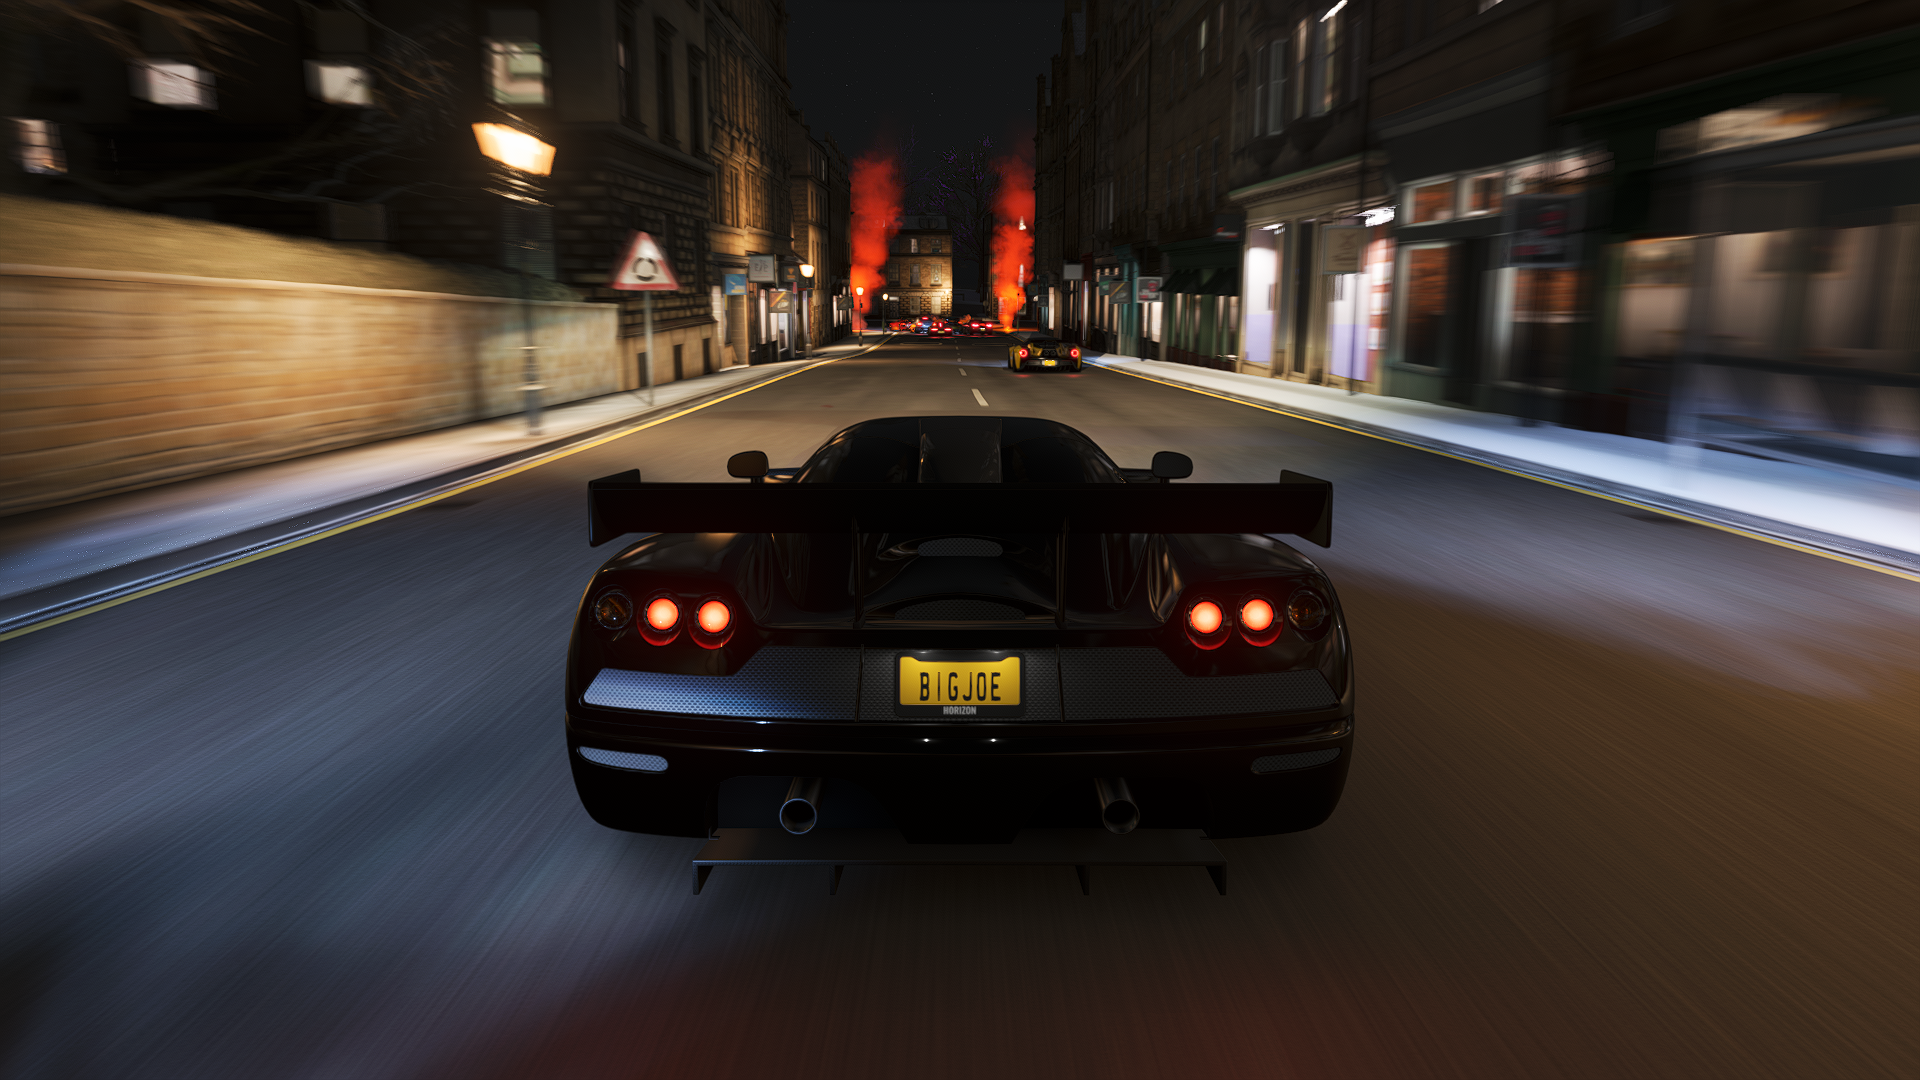 General 1920x1080 Forza Horizon 4 Forza Horizon Forza car driving racing CGI PlaygroundGames Koenigsegg CCGT road video games vehicle rear view licence plates taillights building blurred blurry background Swedish cars